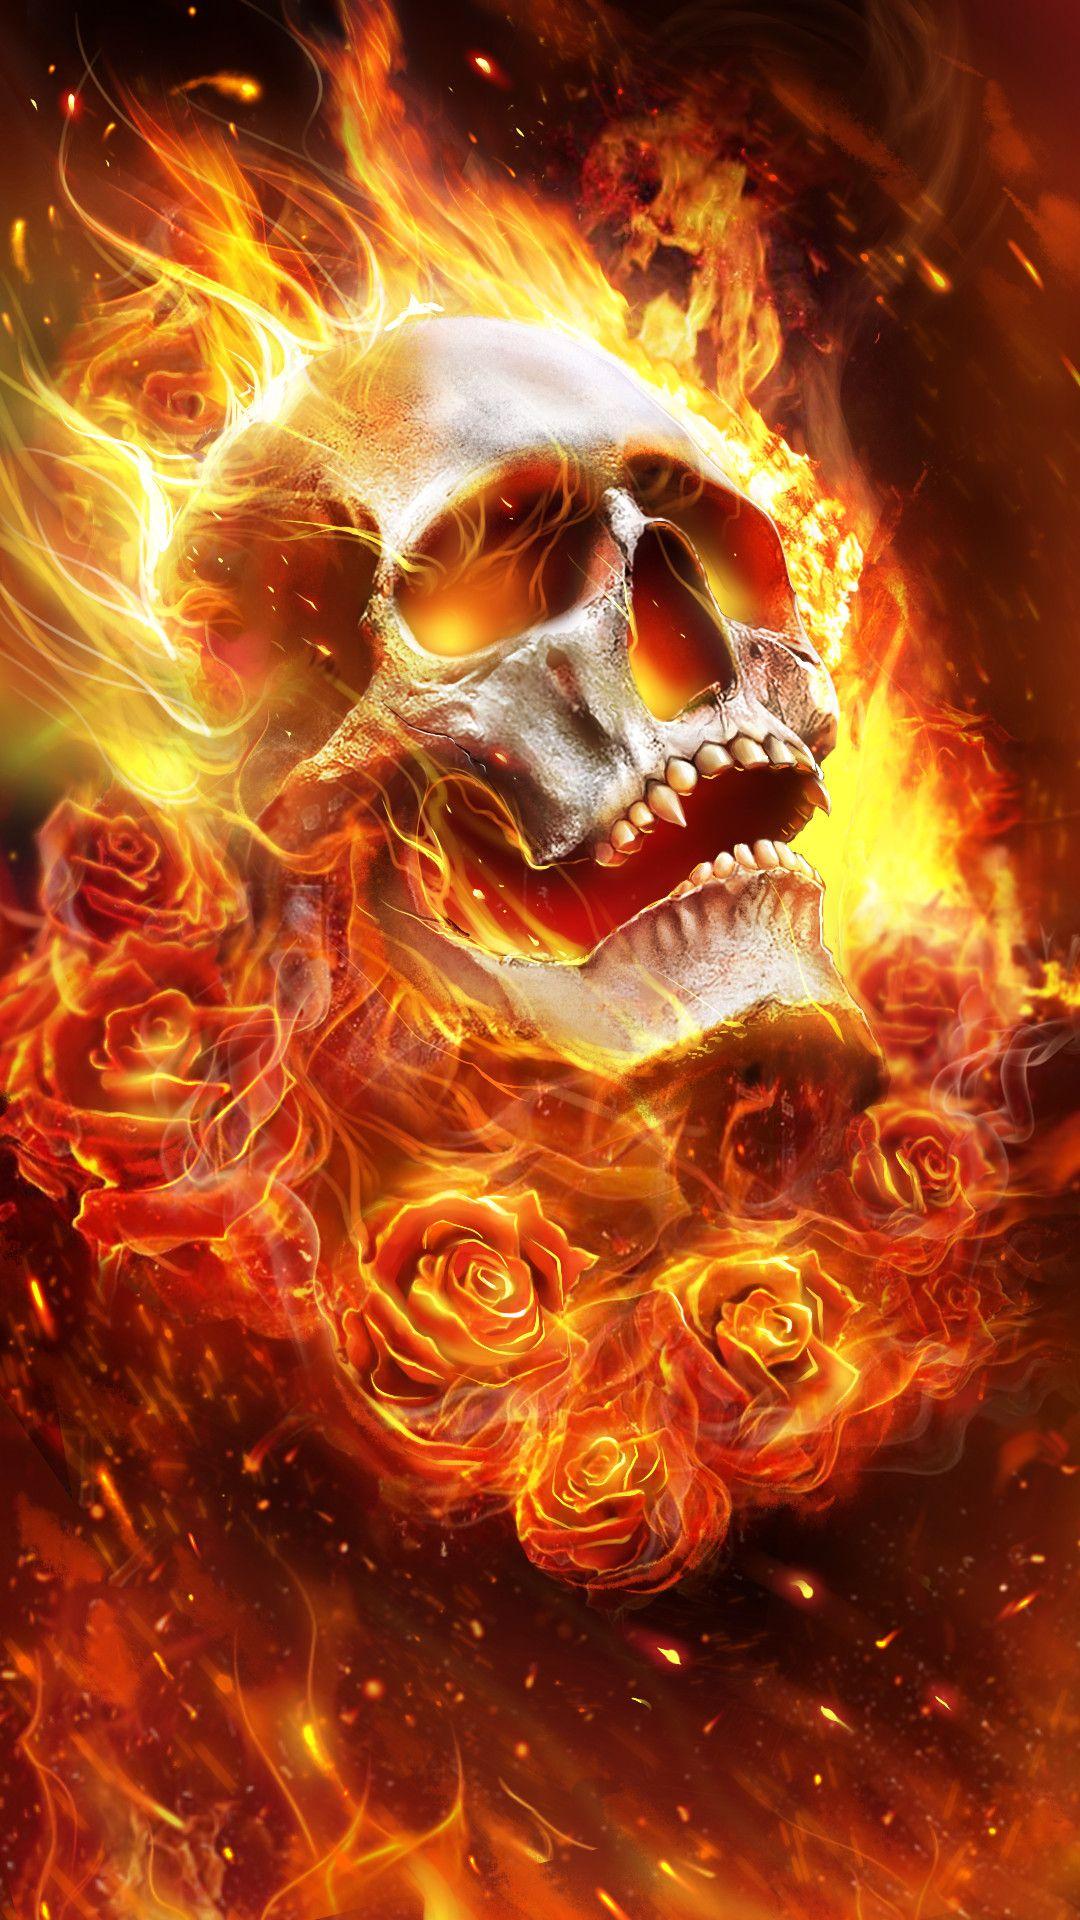 Fire Skull Wallpaper background picture